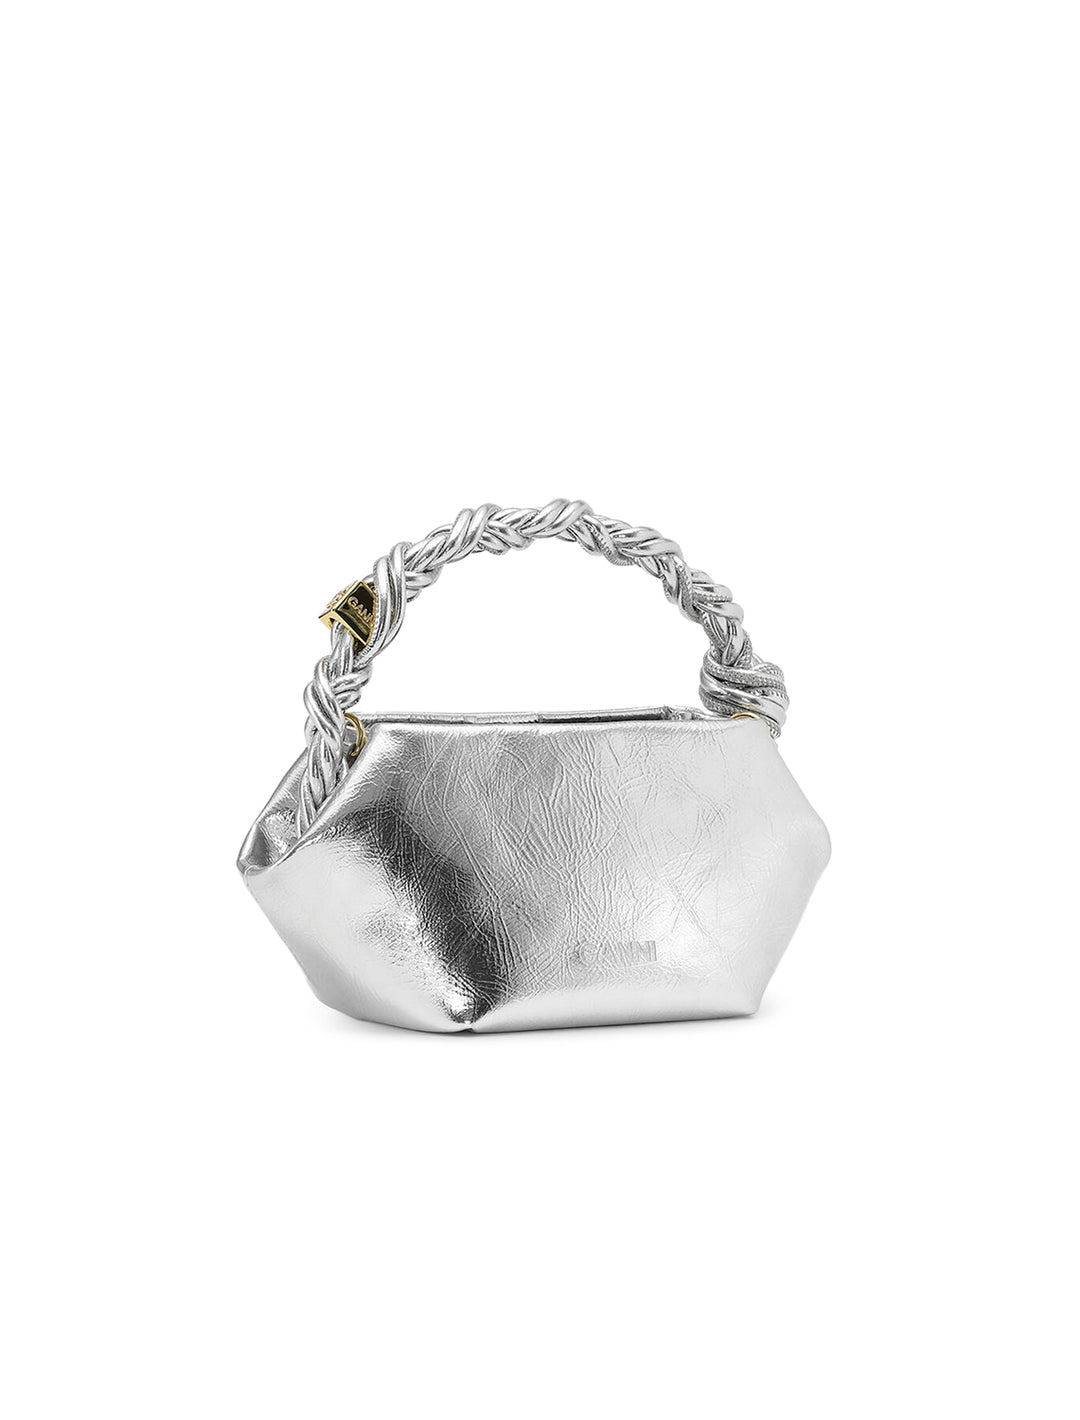 Back angle view of GANNI's mini bou bag in silver.